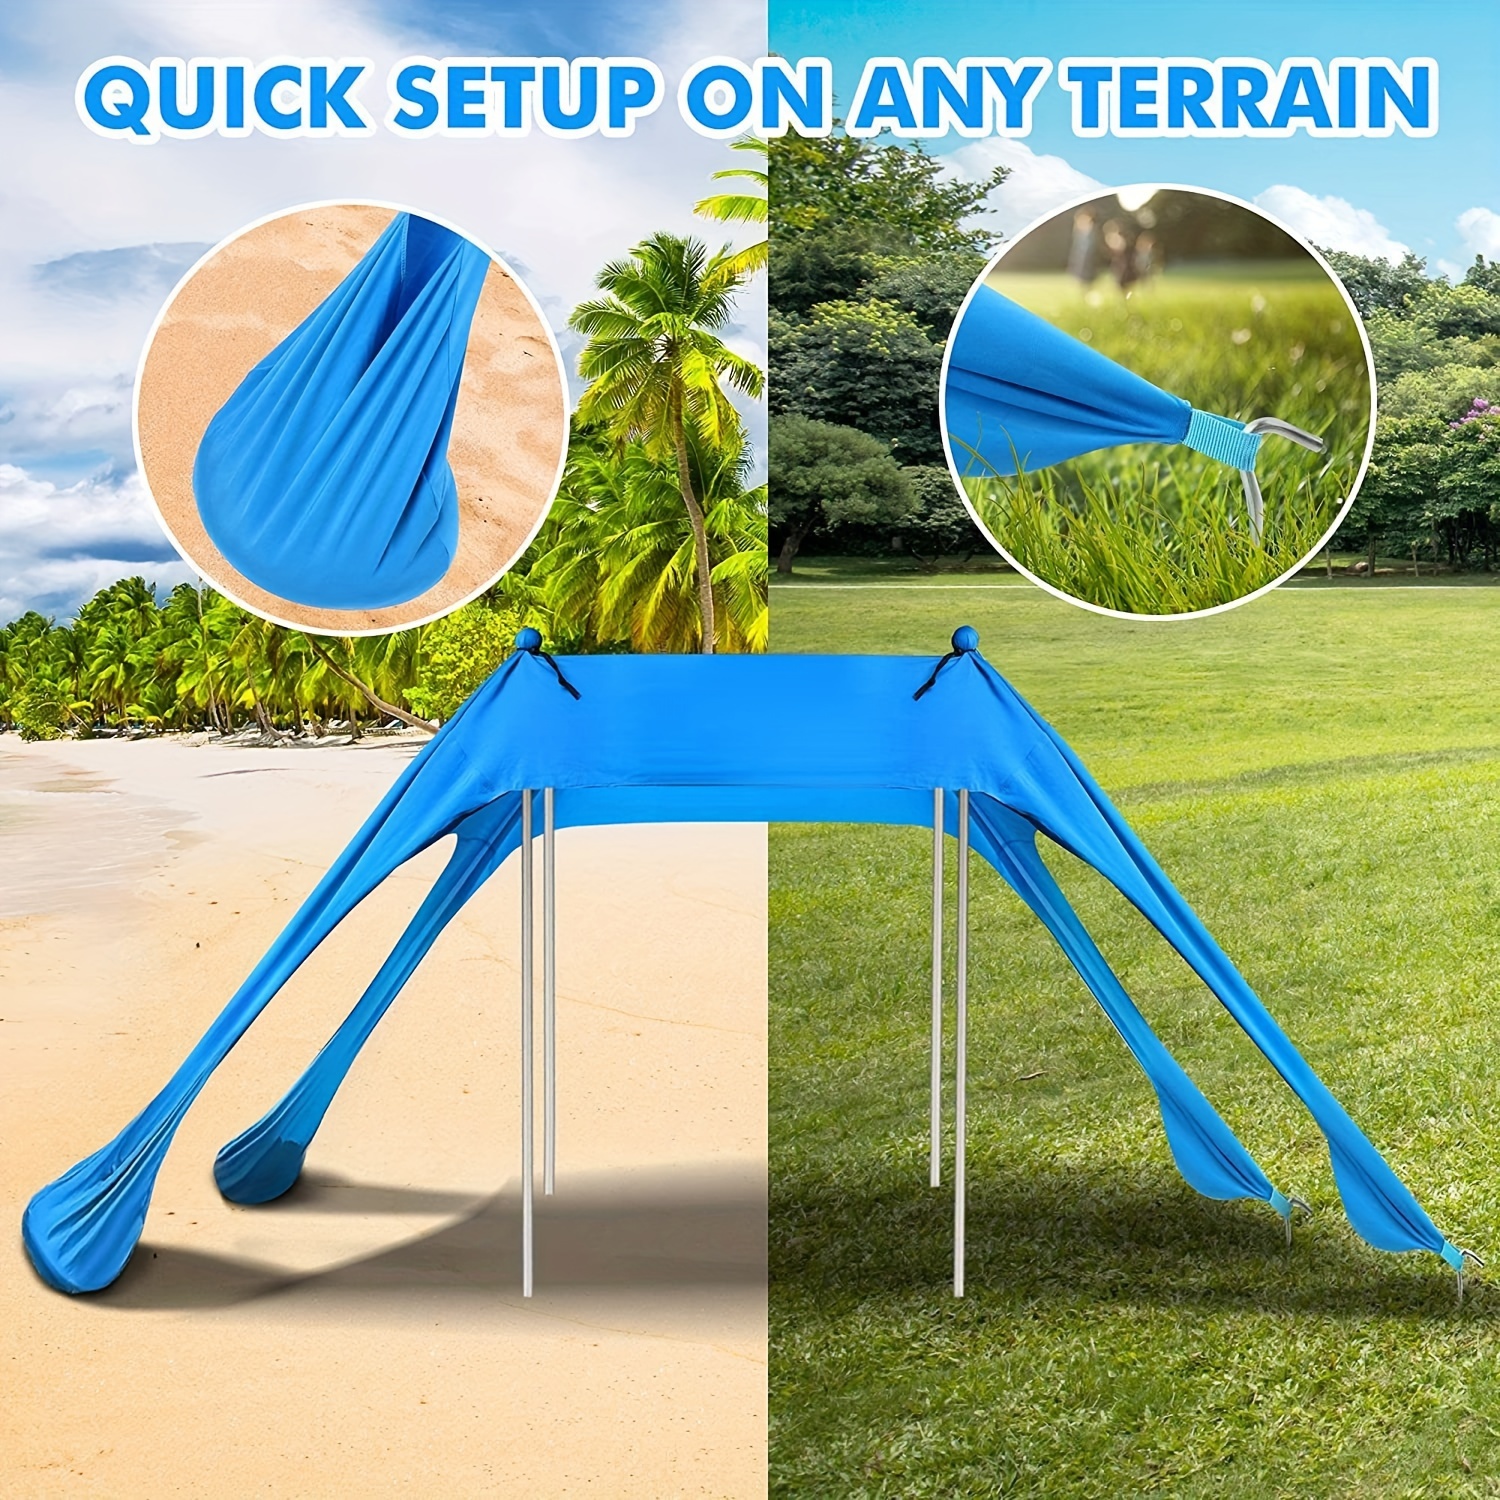 

Portable Outdoor Canopy Tent - Waterproof, Sun Protection For Beach, Lawn & Camping, Durable Polyester With Alloy Frame